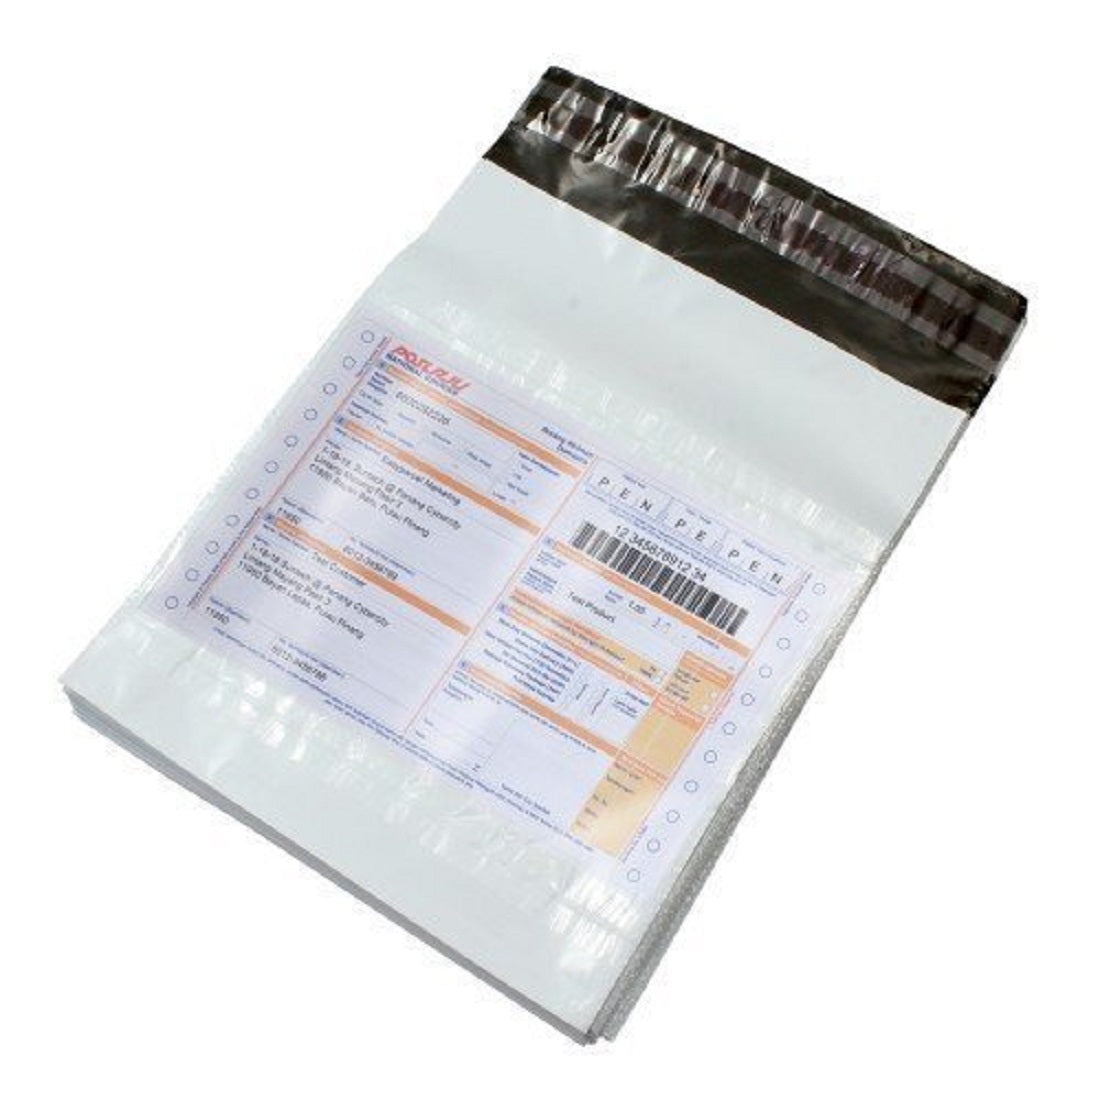 Courier Bags/Envelopes/Pouches/Cover 10X12 inches+ 2inch Flap  Pack of 100 Tamper Proof Plastic Polybags for Shipping/Packing (With POD)